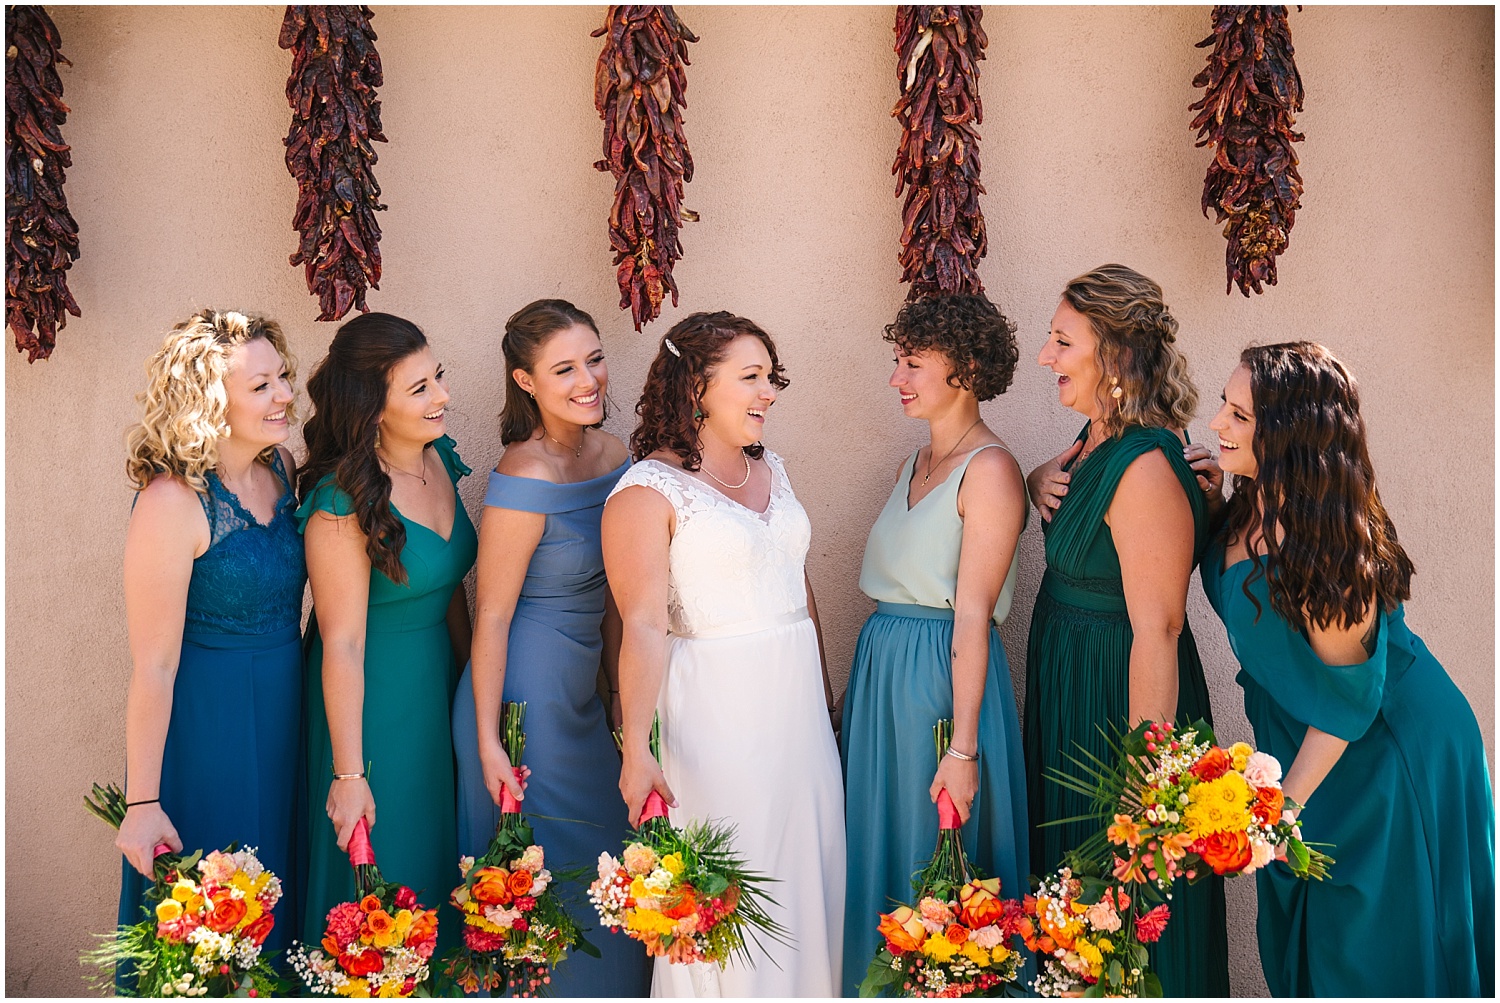 Bridesmaids in mismatched turquoise dresses stand under chile ristras with perfect Santa Fe wedding style